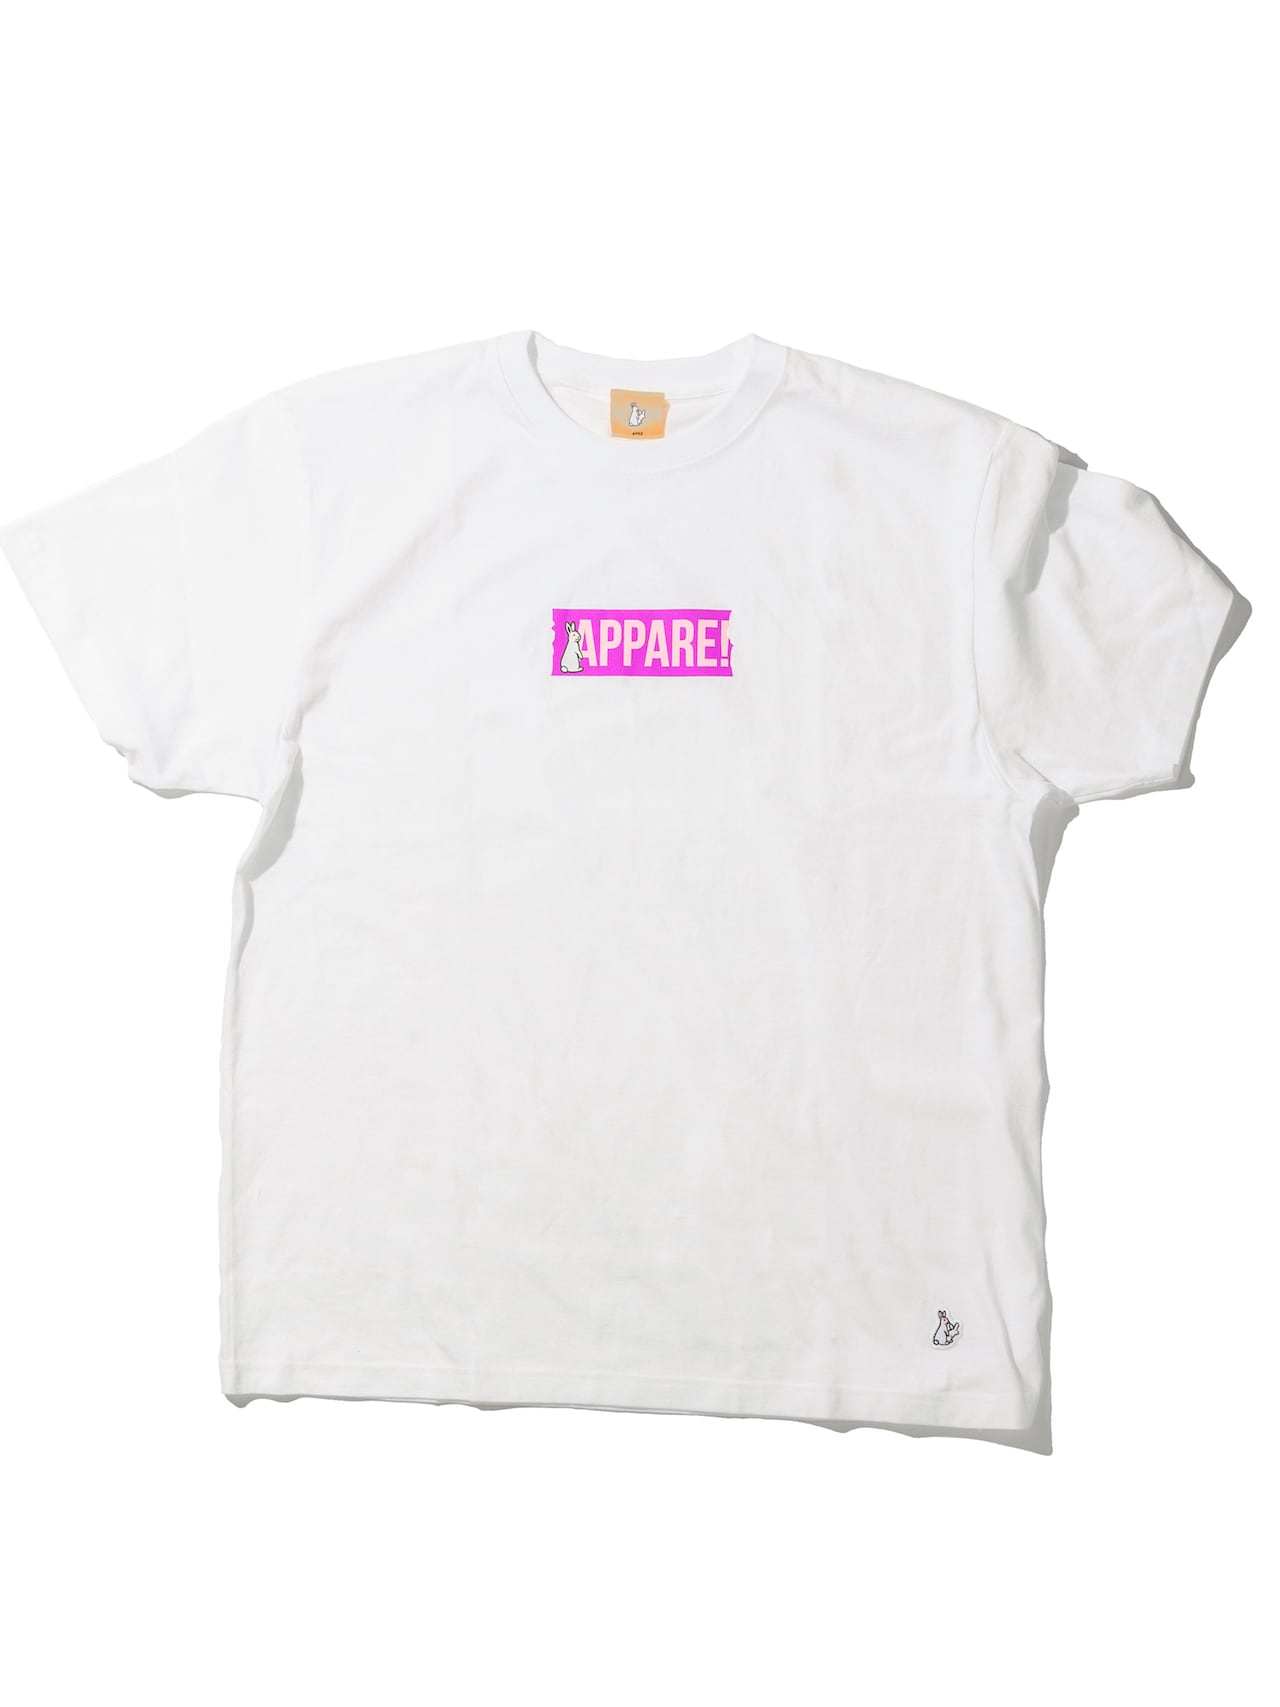 Appare! collaboration with #FR2 Box Logo T-shirt | TAKENOKO SHOP powered by  BASE